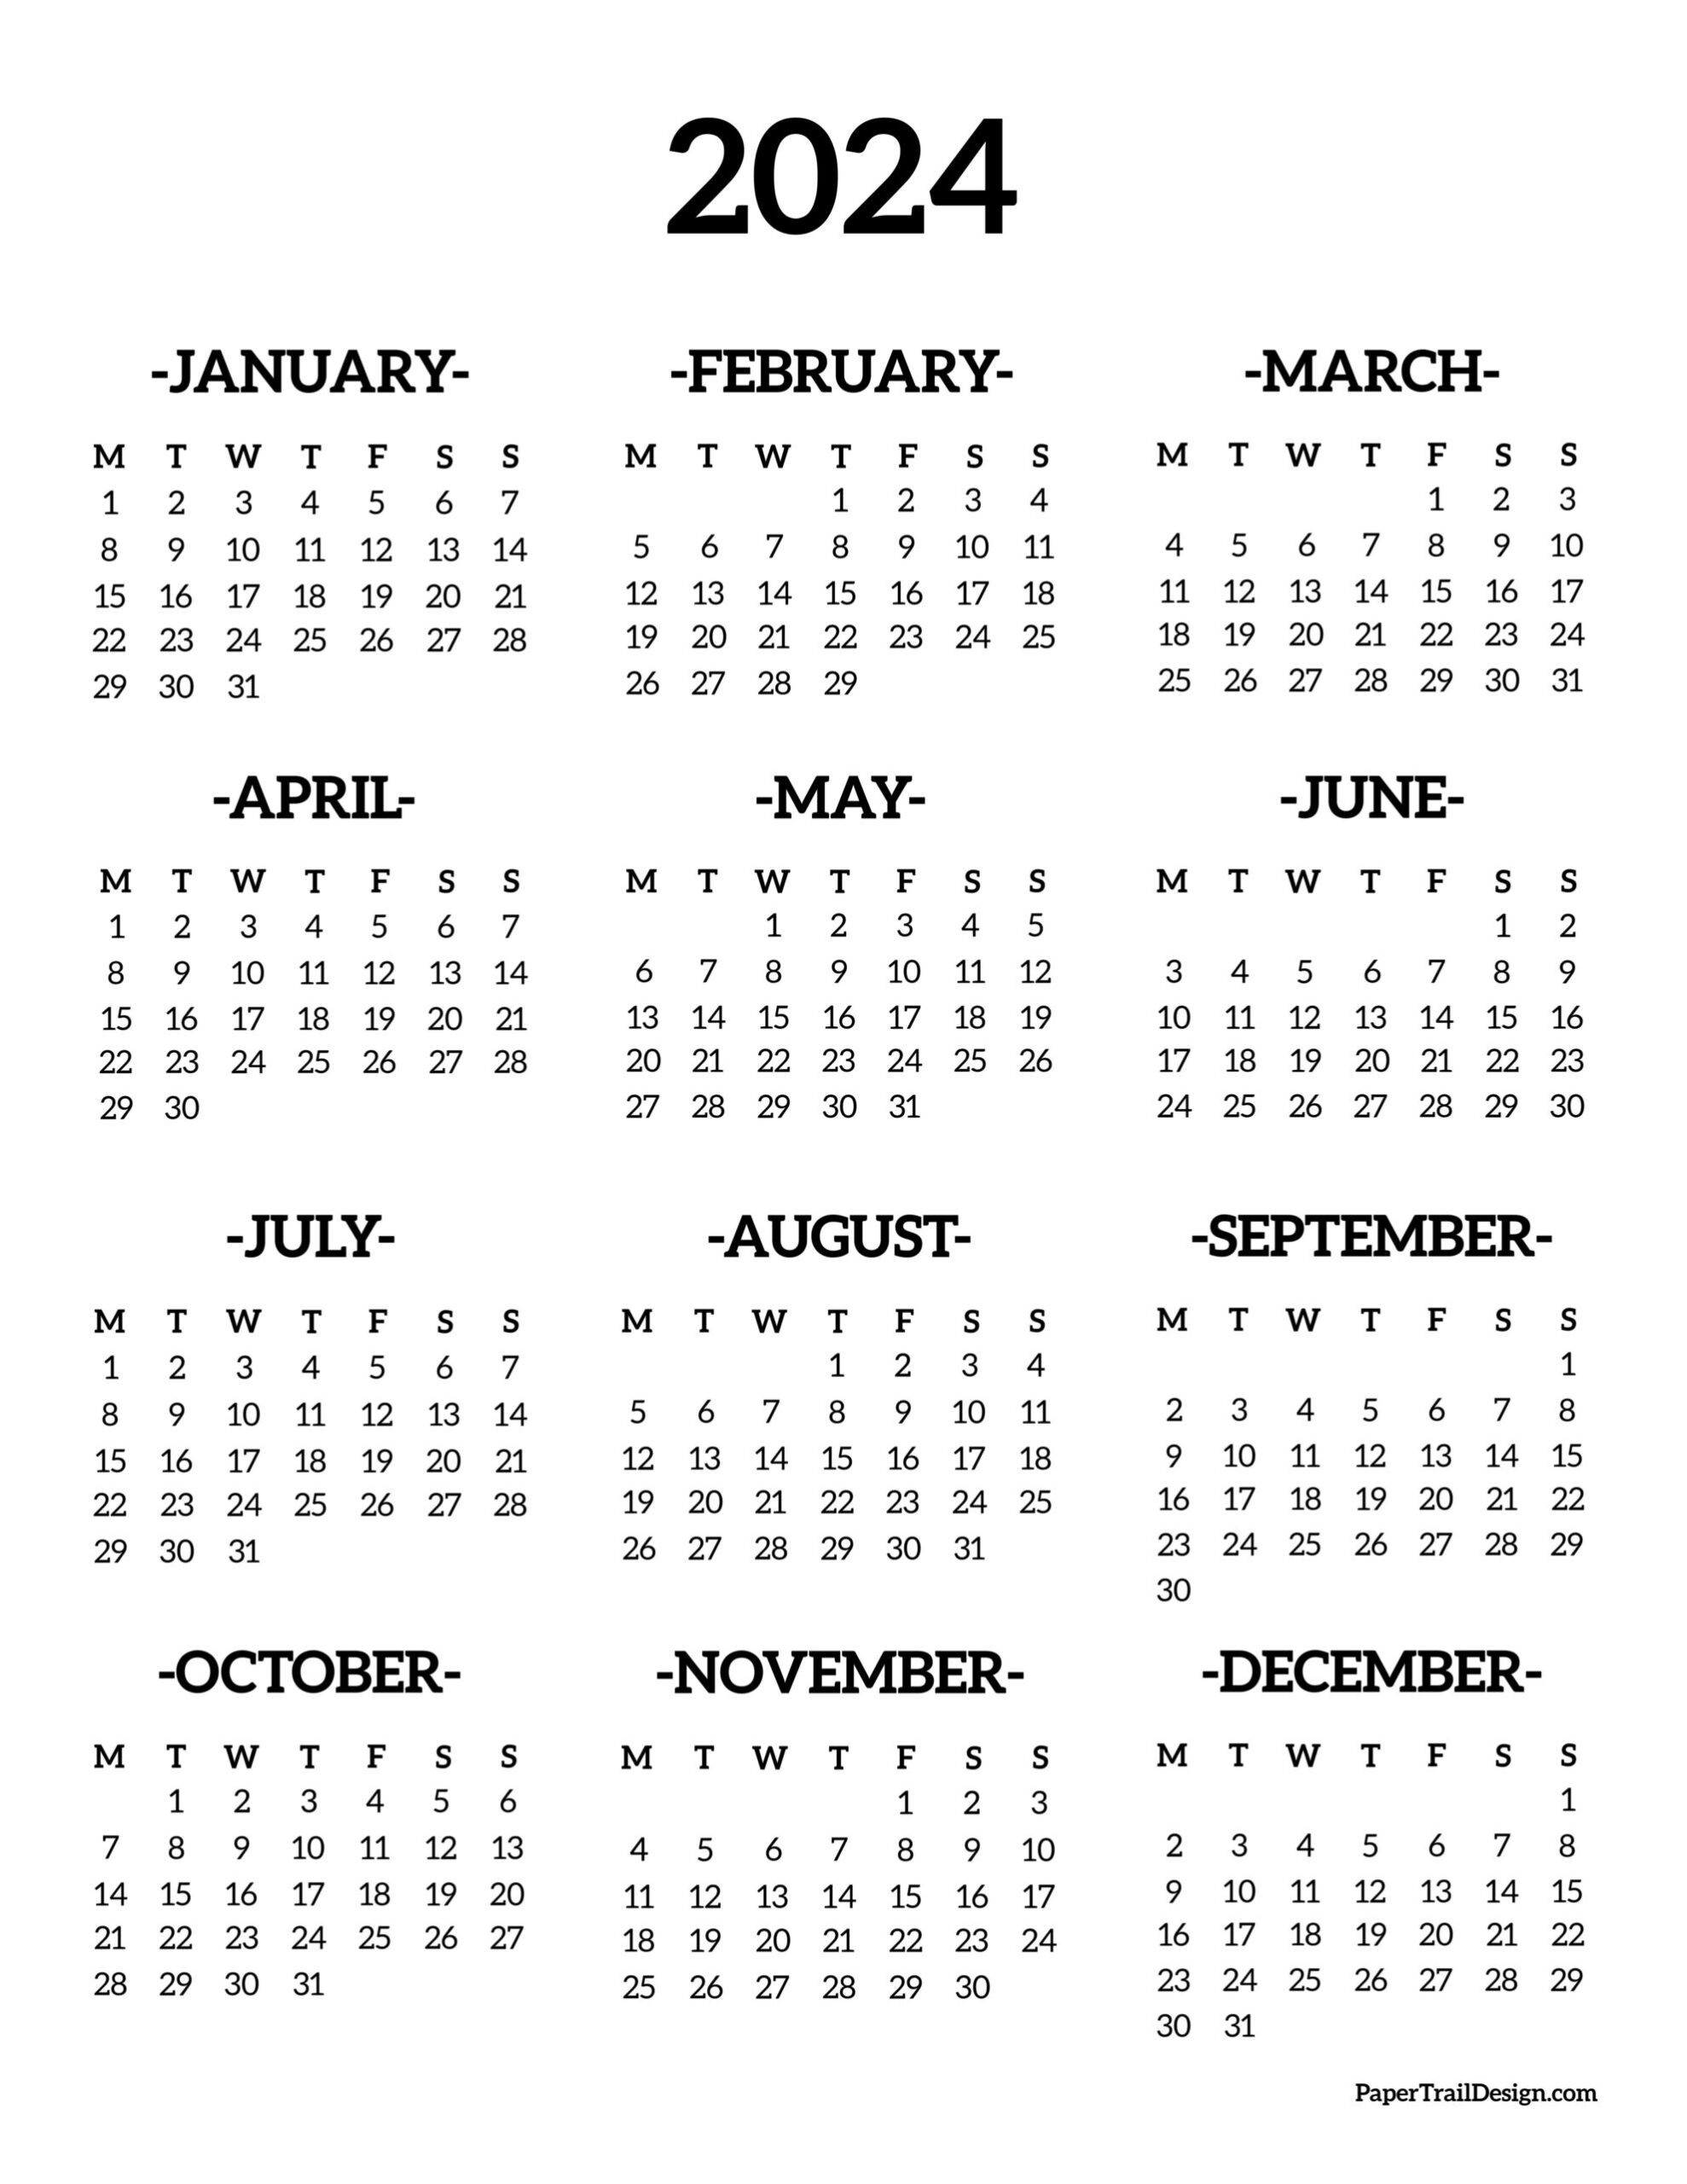 2024 Monday Start Calendar - One Page - Paper Trail Design | 2024 Printable Calendar One Page Monday Start